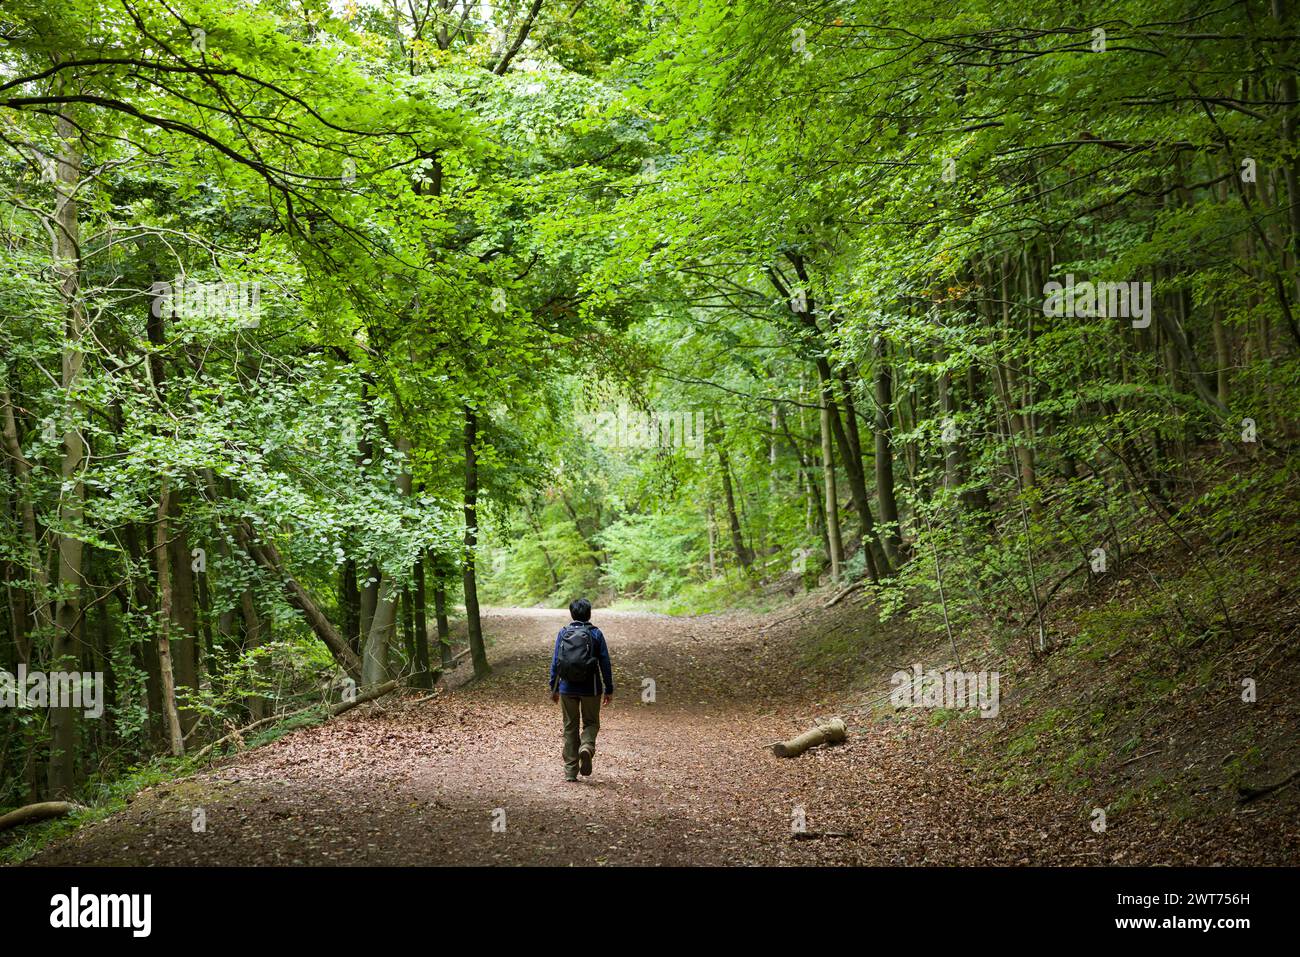 Asian Indian woman hiking alone on a woodland trail through forest in Chiltern Hills. Wendover, Buckinghamshire, UK Stock Photo